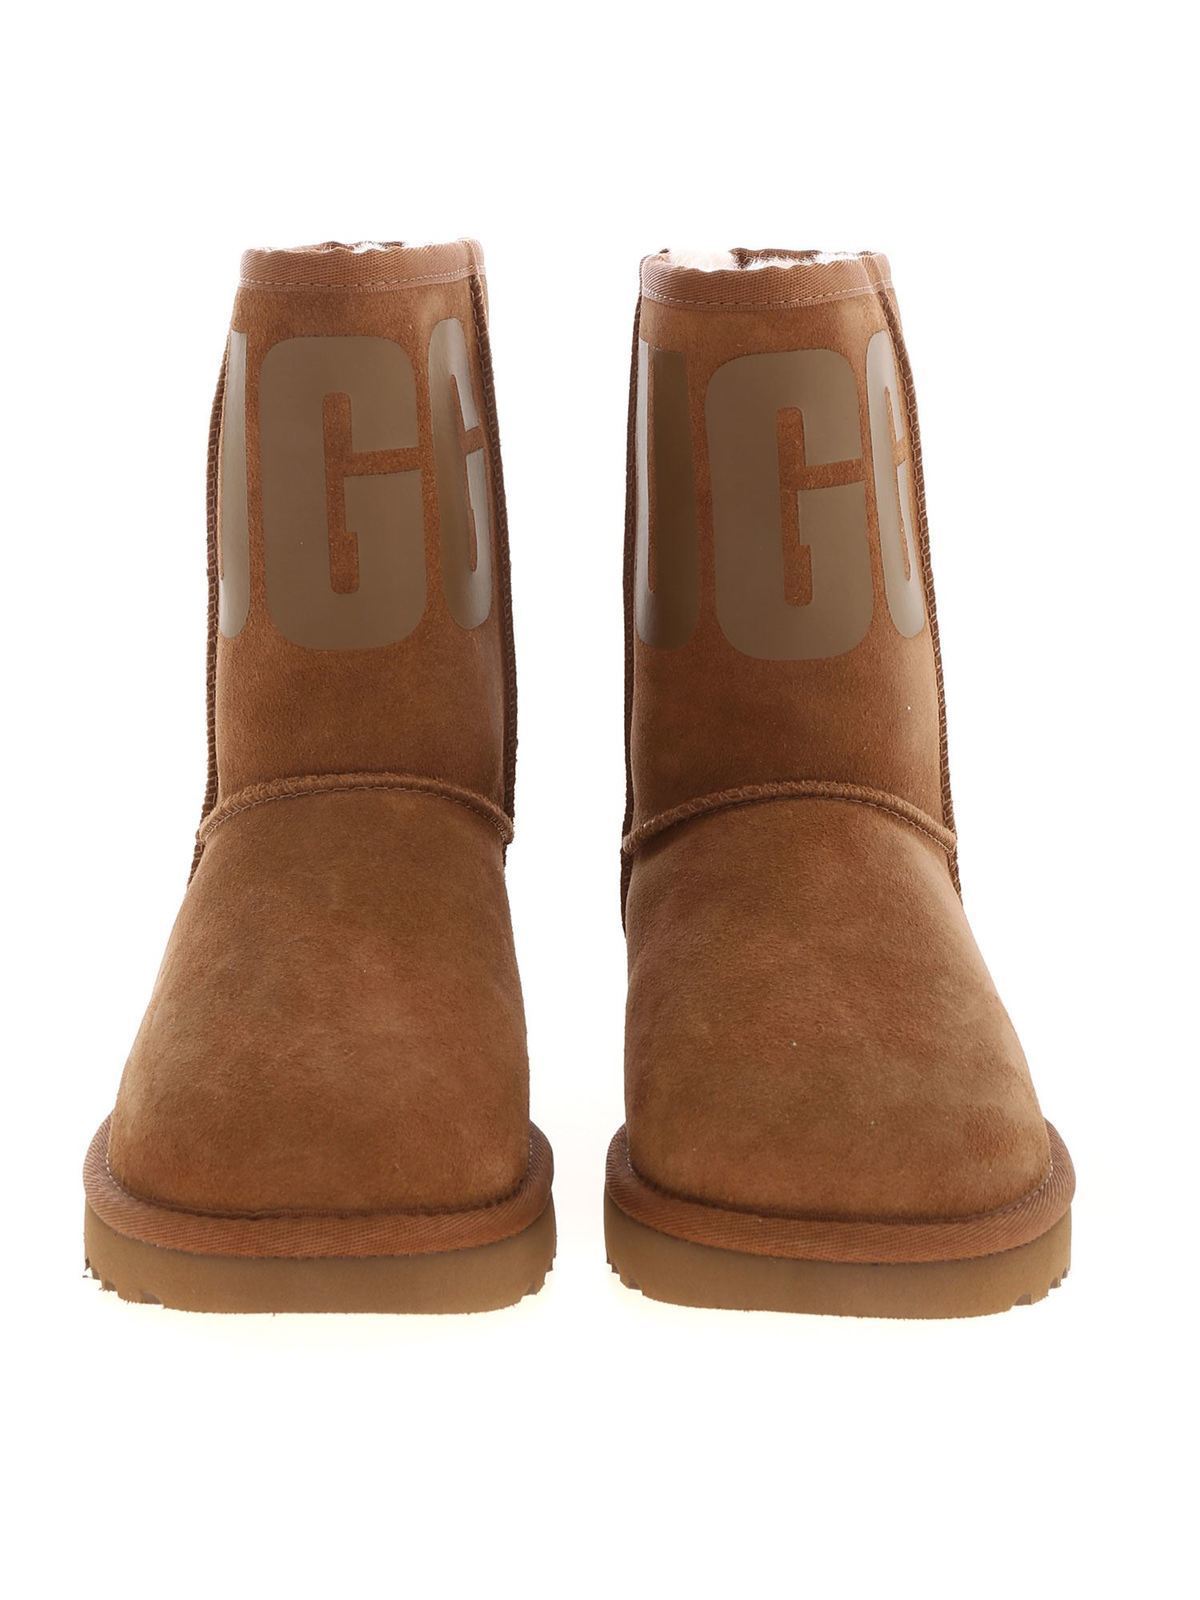 ugg australia ankle boots